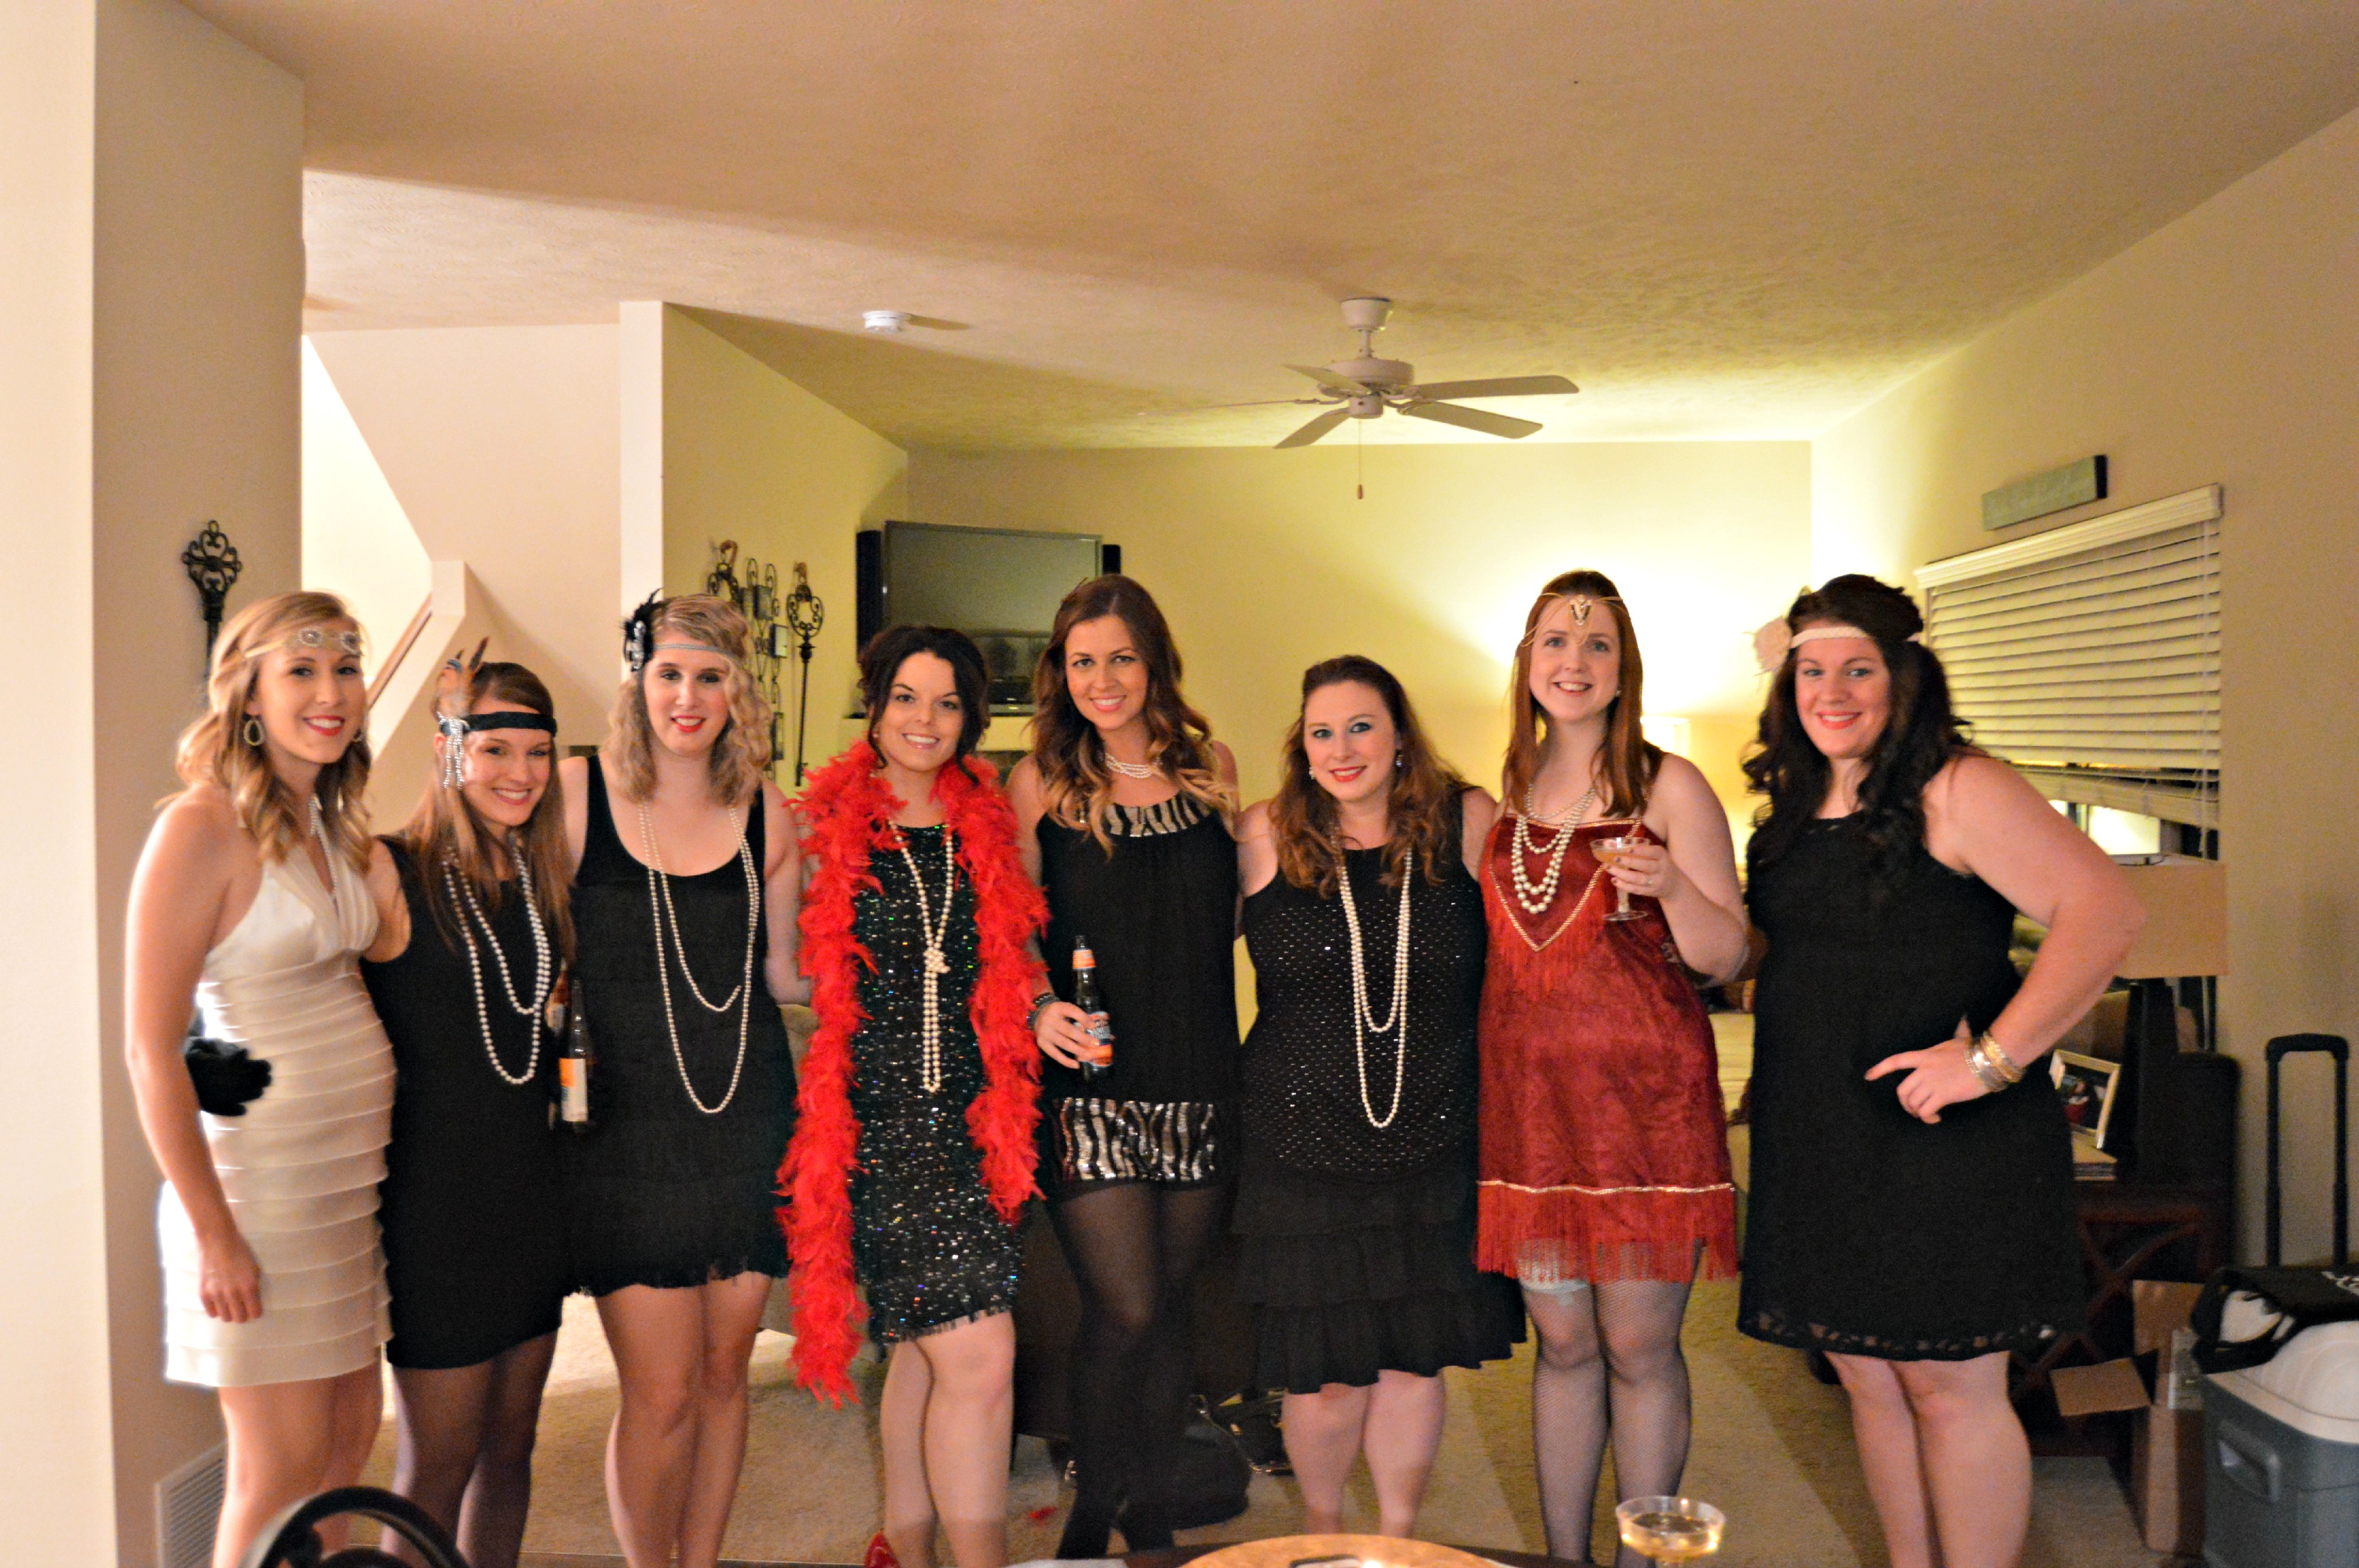 20s themed outfits